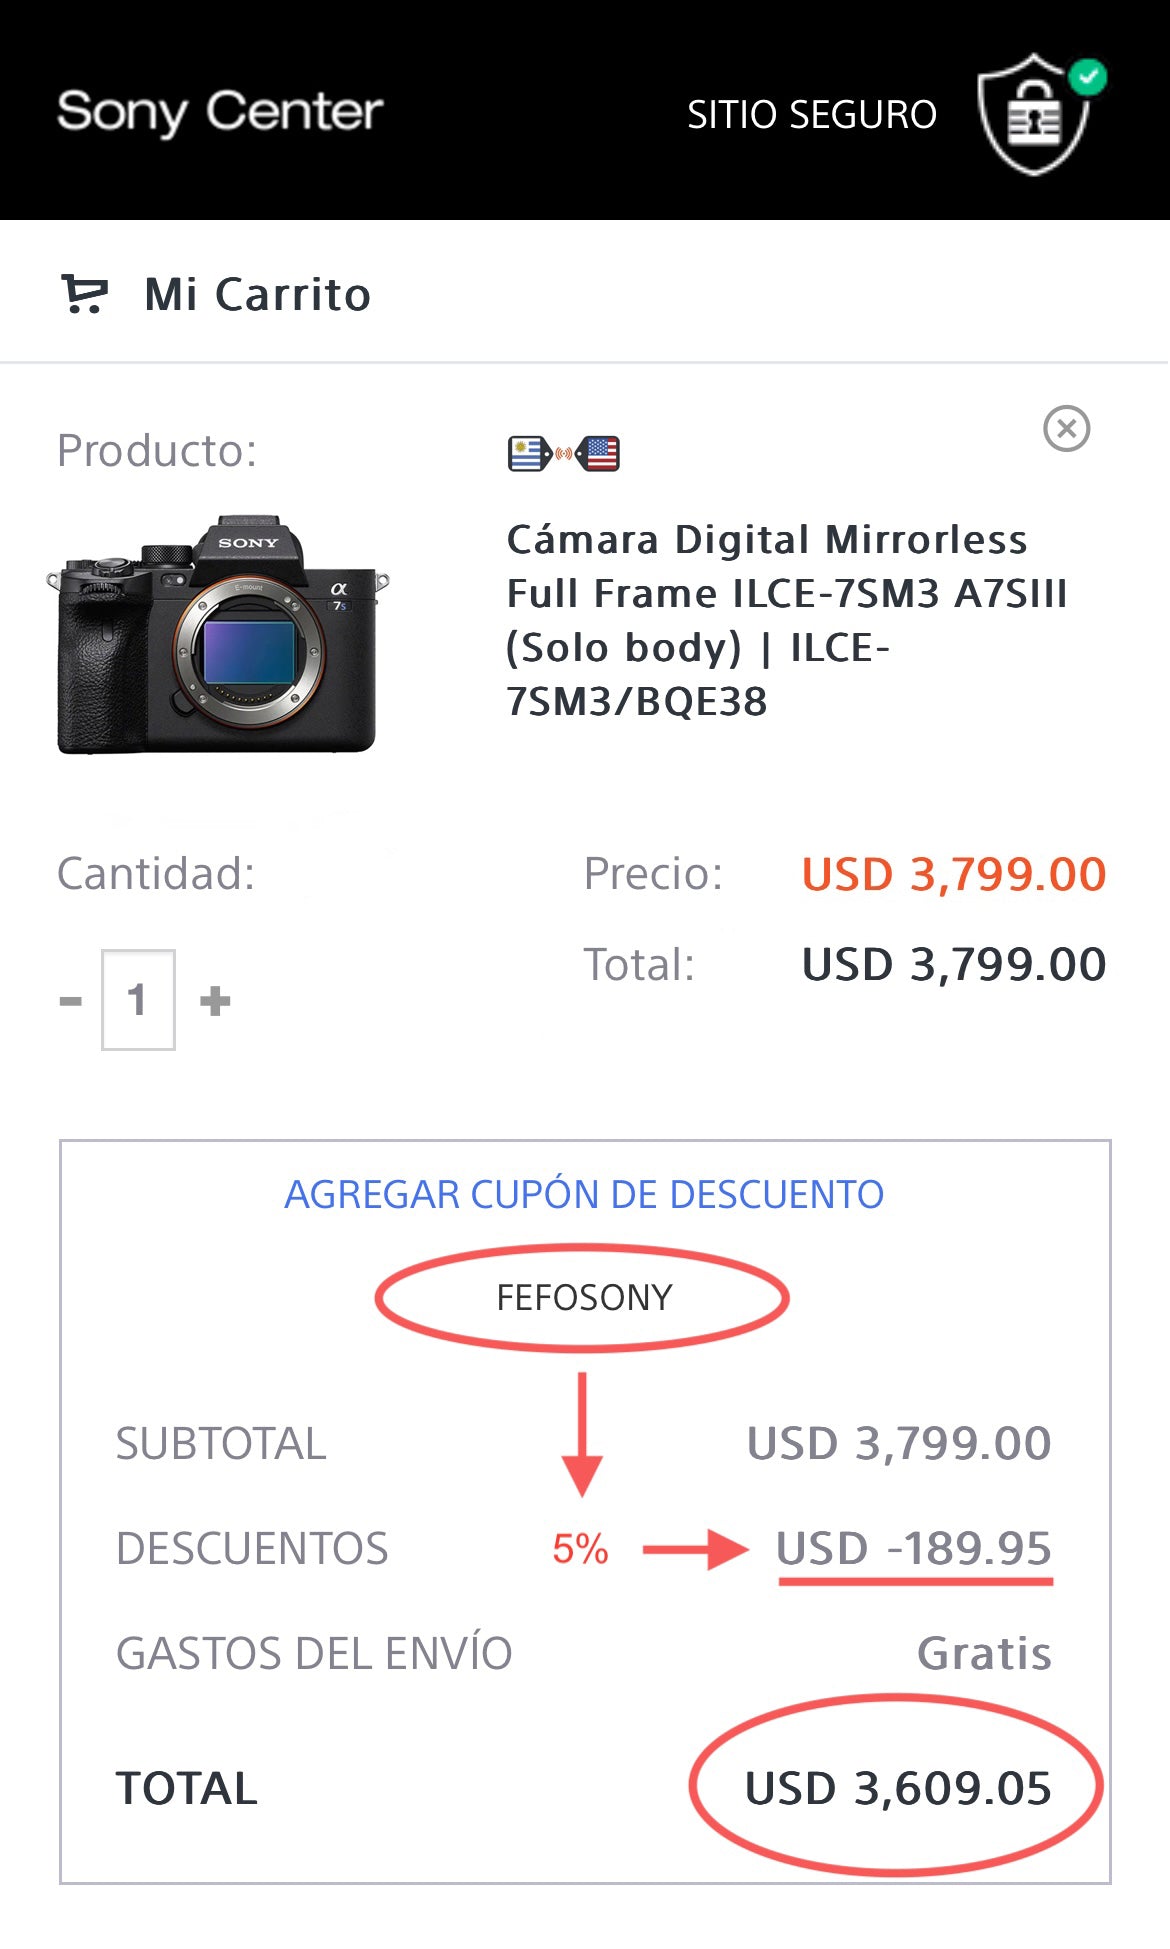 Screenshot (edited) of the Sony Center Uruguay checkout page